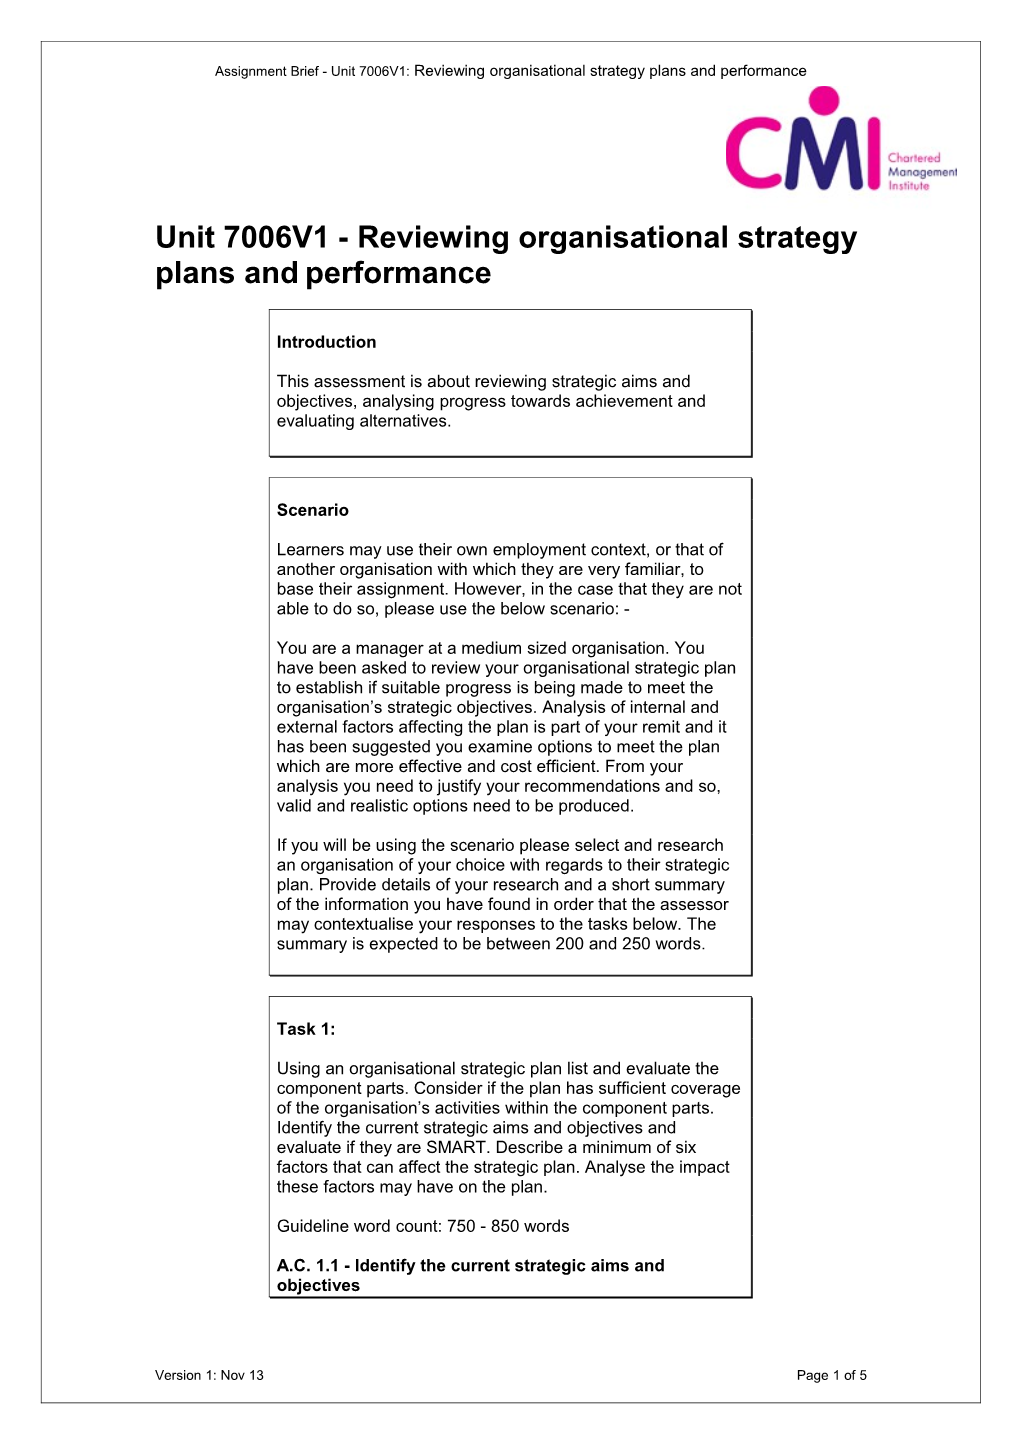 Unit 7006V1 - Reviewing Organisational Strategy Plans and Performance